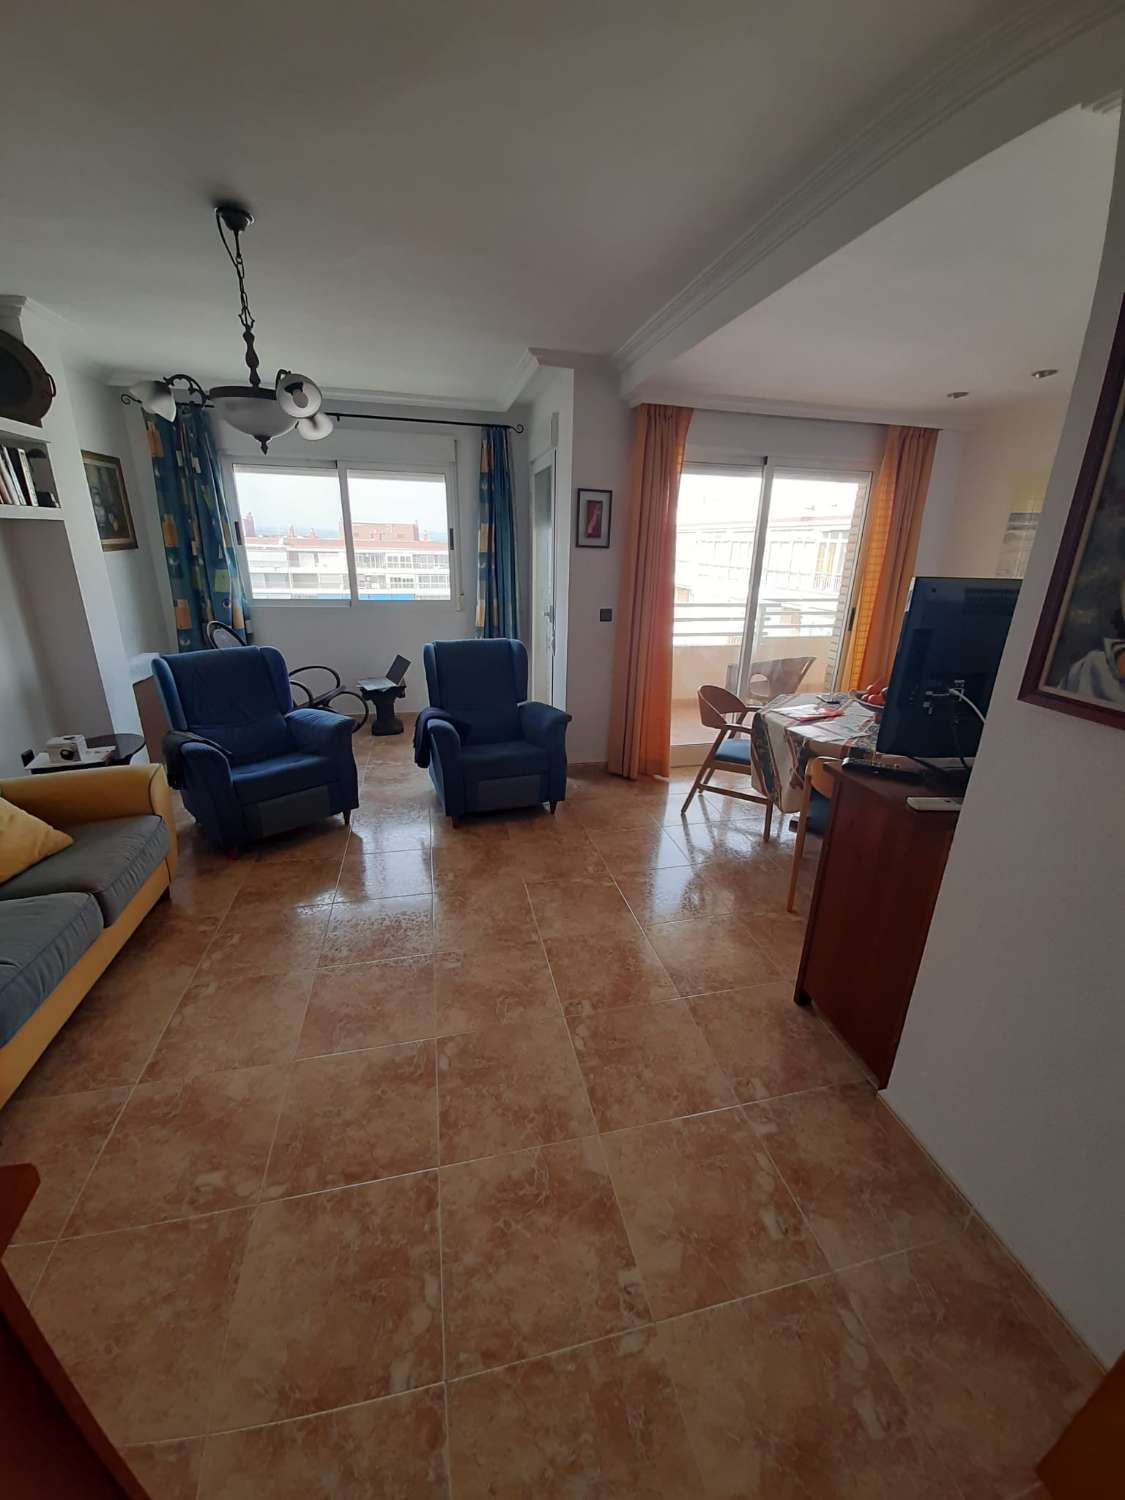 APARTMENT WITH SEA AND BEACH VIEWS -CENTRALLY LOCATED